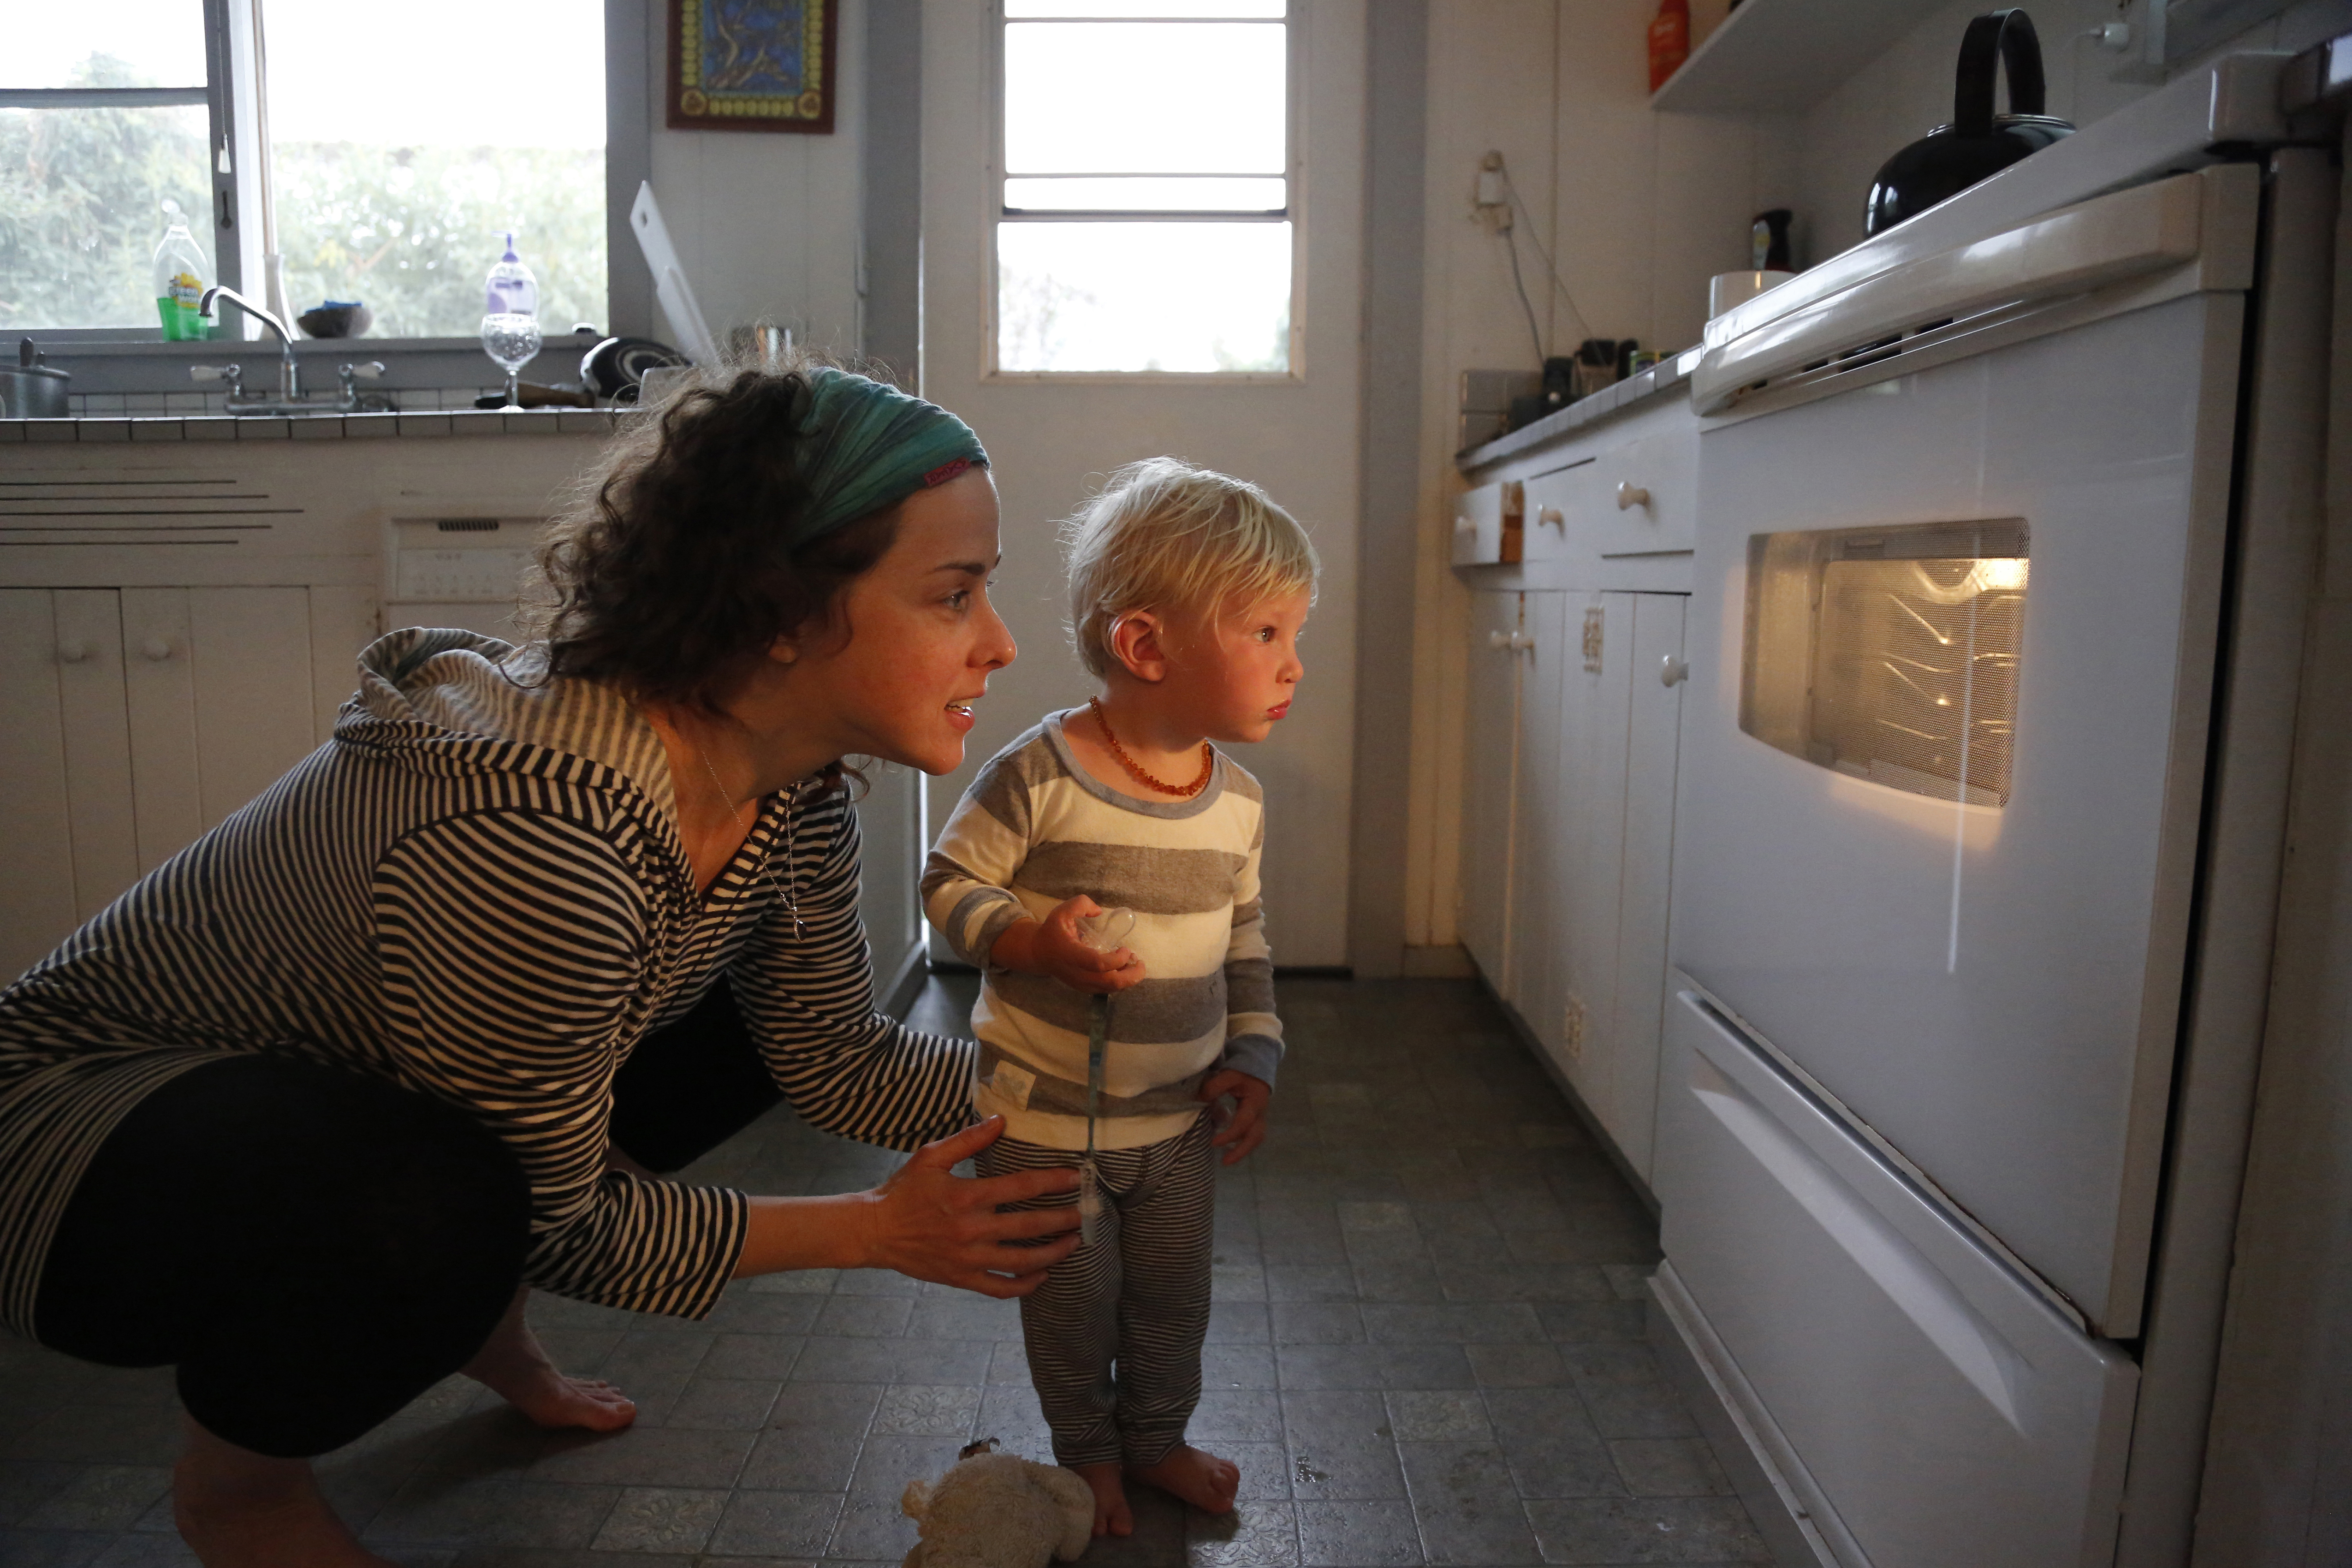 Mother and child looking at food cooking in their oven